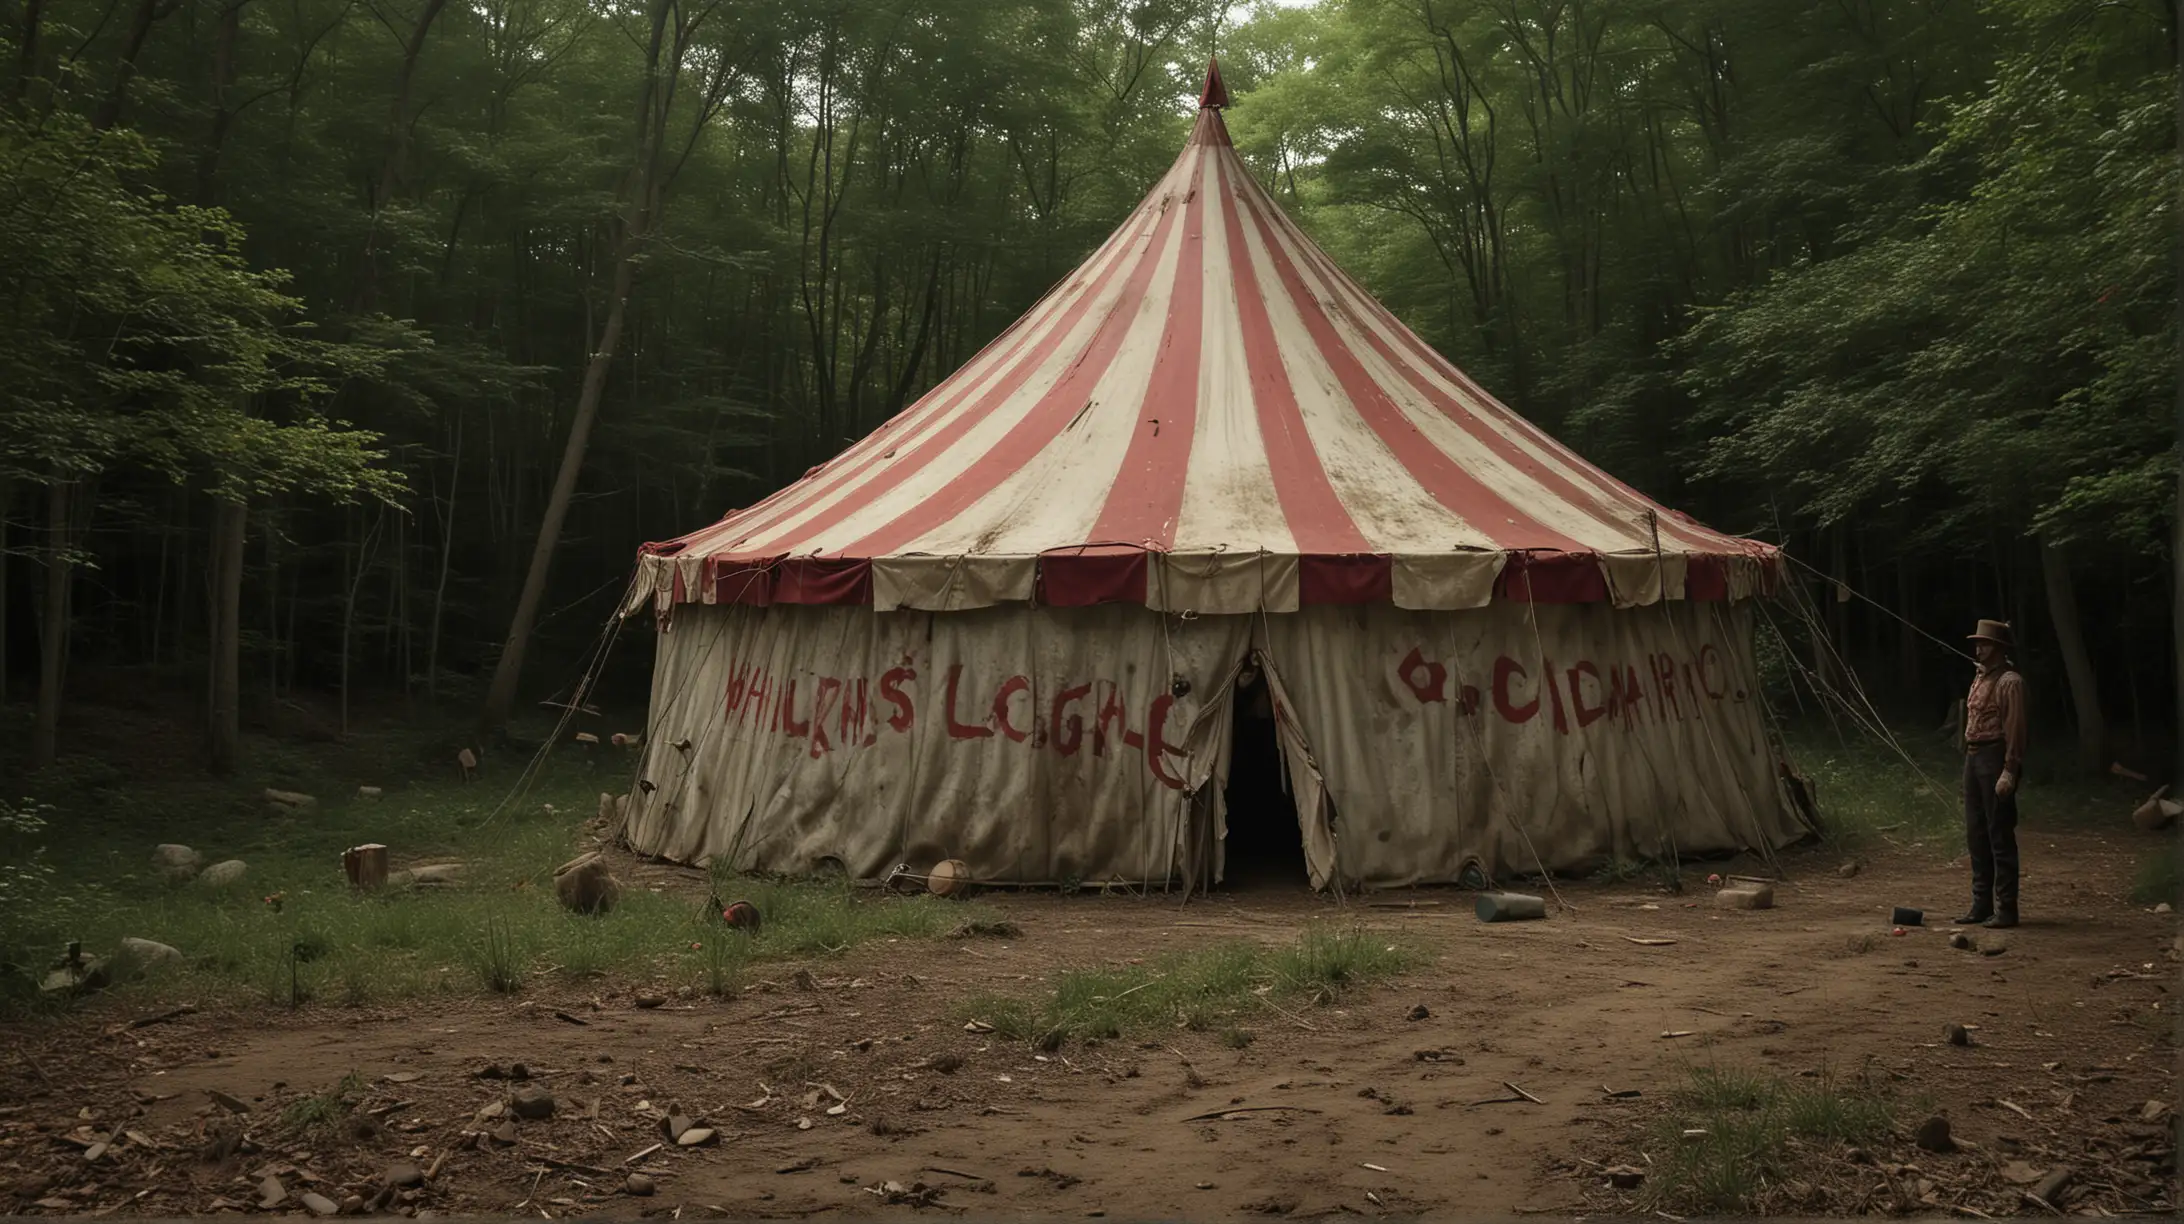 The incident was shrouded in mystery, with whispers of foul play. Chuckles vanished soon after, only to resurface in Hollow Brook’s lesser-known traveling circus, very clear and 4k quality photo 